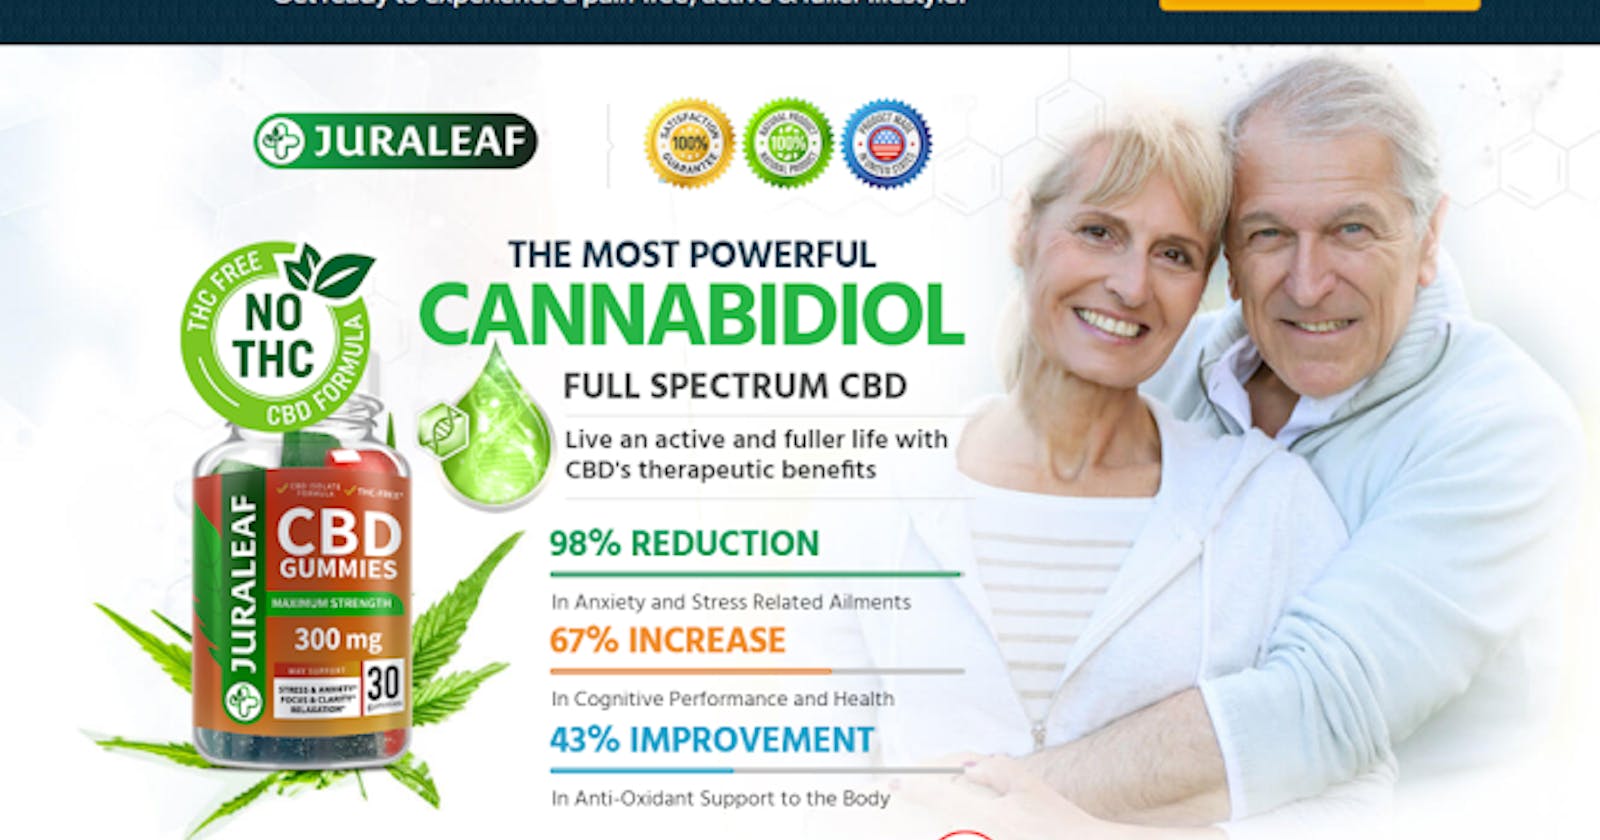 Juraleaf CBD Gummies - Effective Product Good For You, Where To Buy!